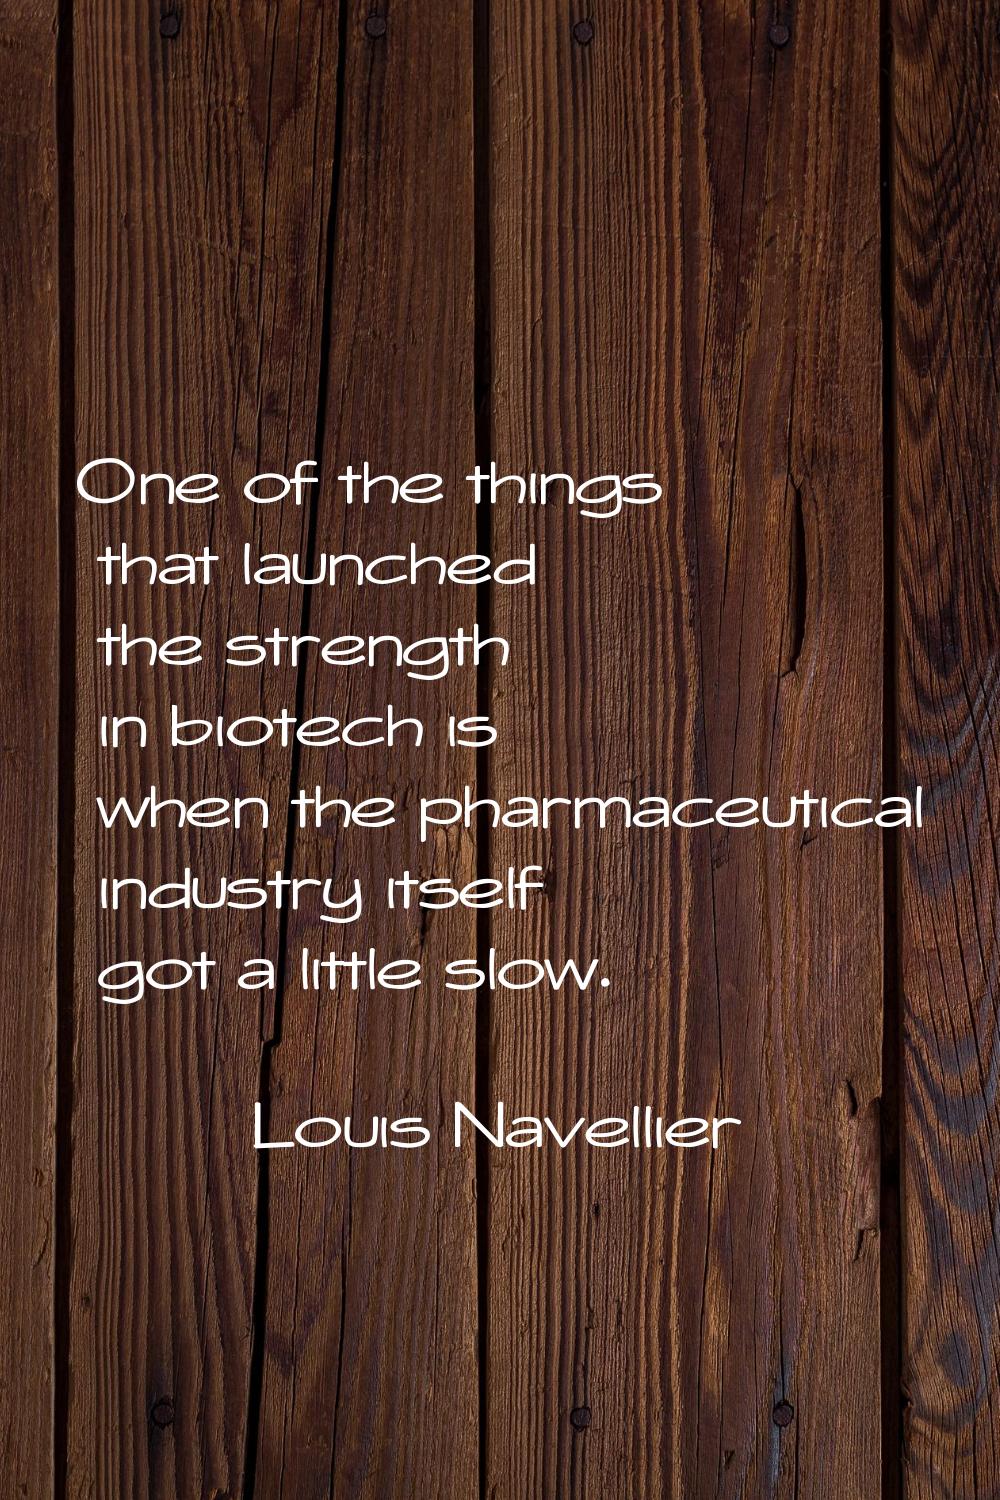 One of the things that launched the strength in biotech is when the pharmaceutical industry itself 